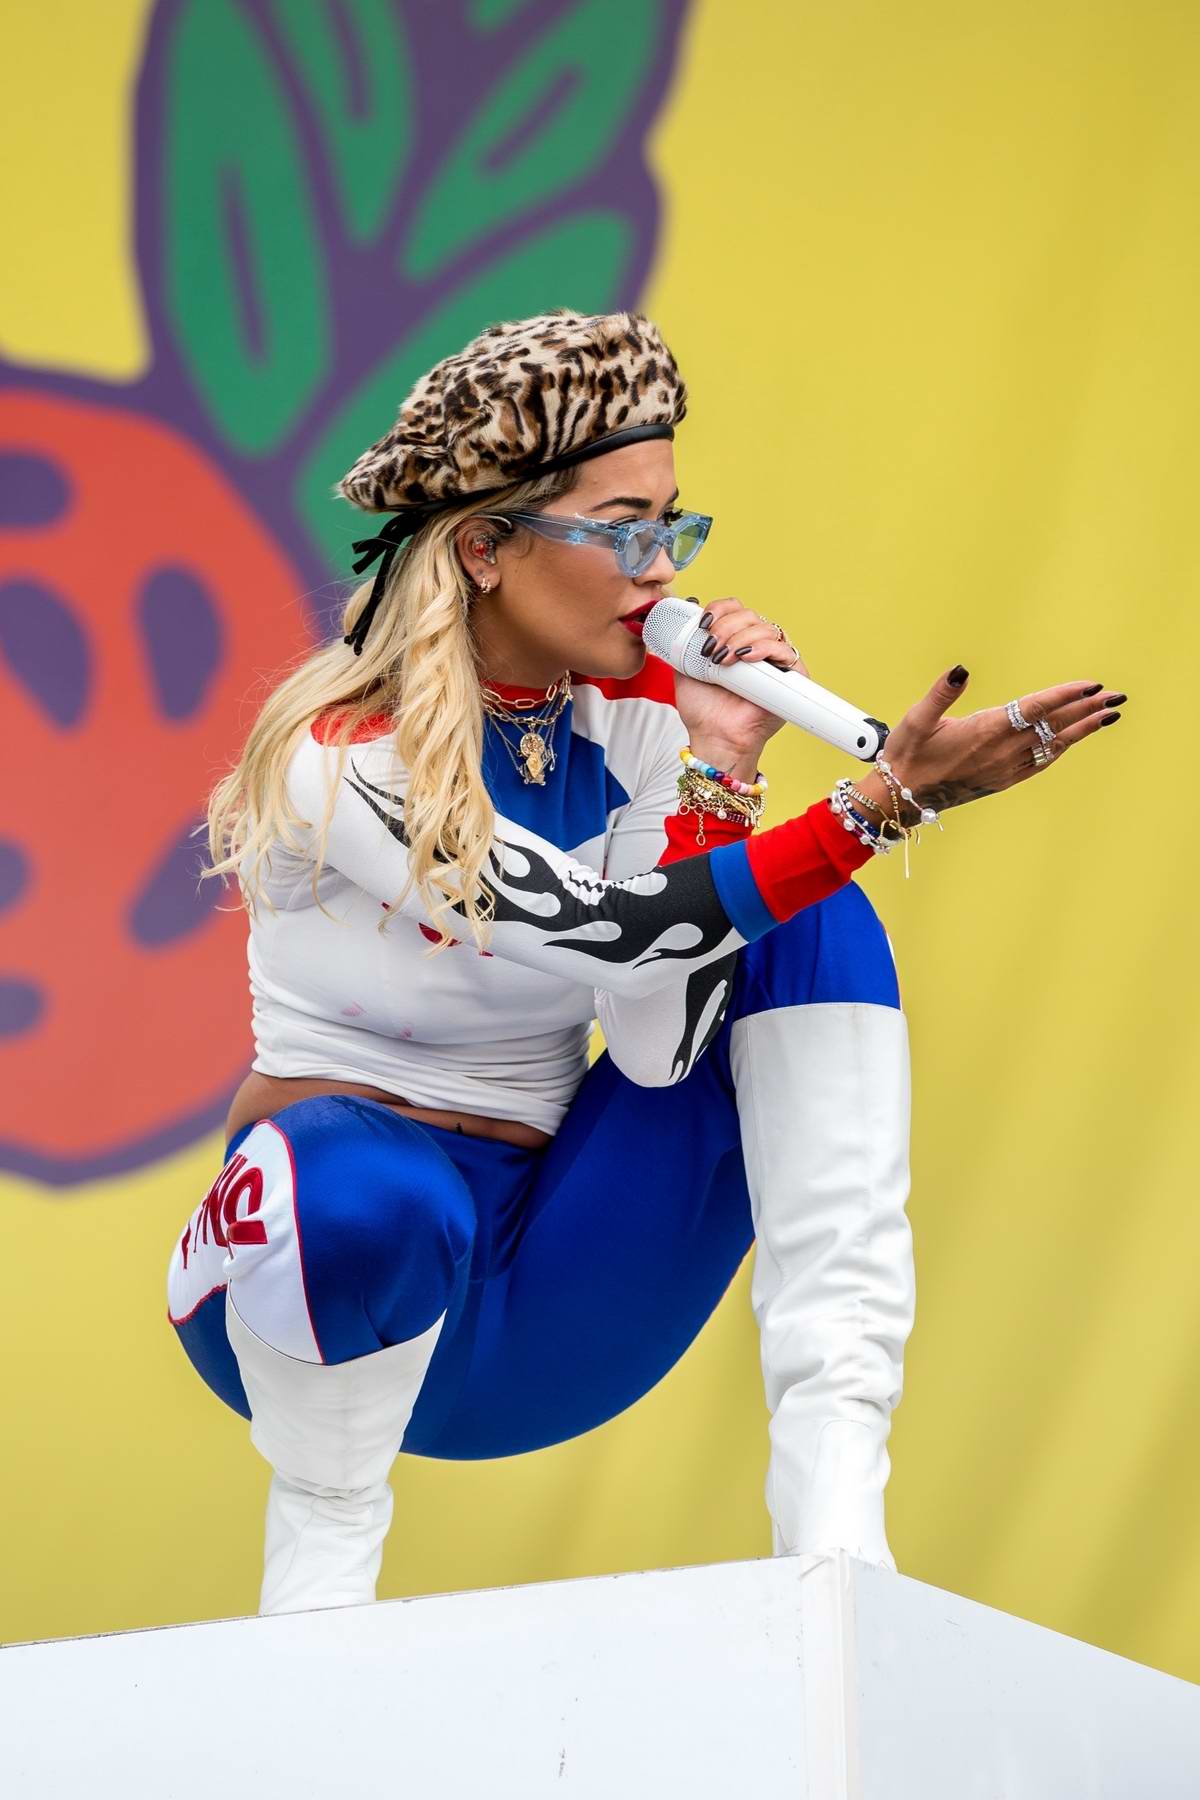 rita ora performs on stage at the 2019 lollapalooza festival in berlin ...